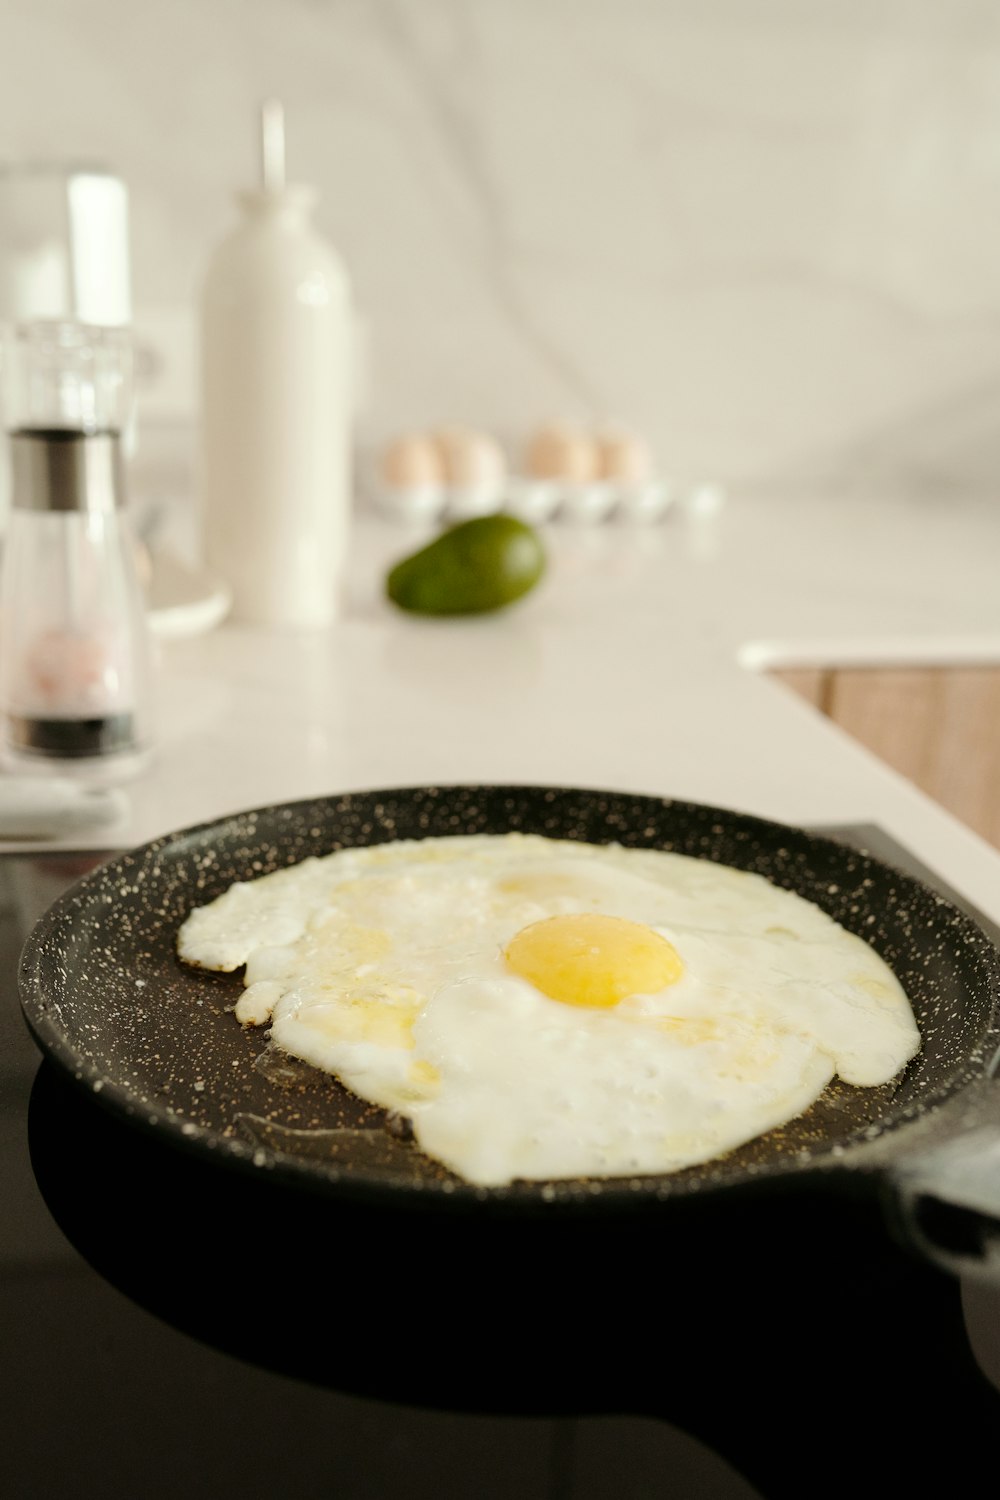 a frying pan with a fried egg in it